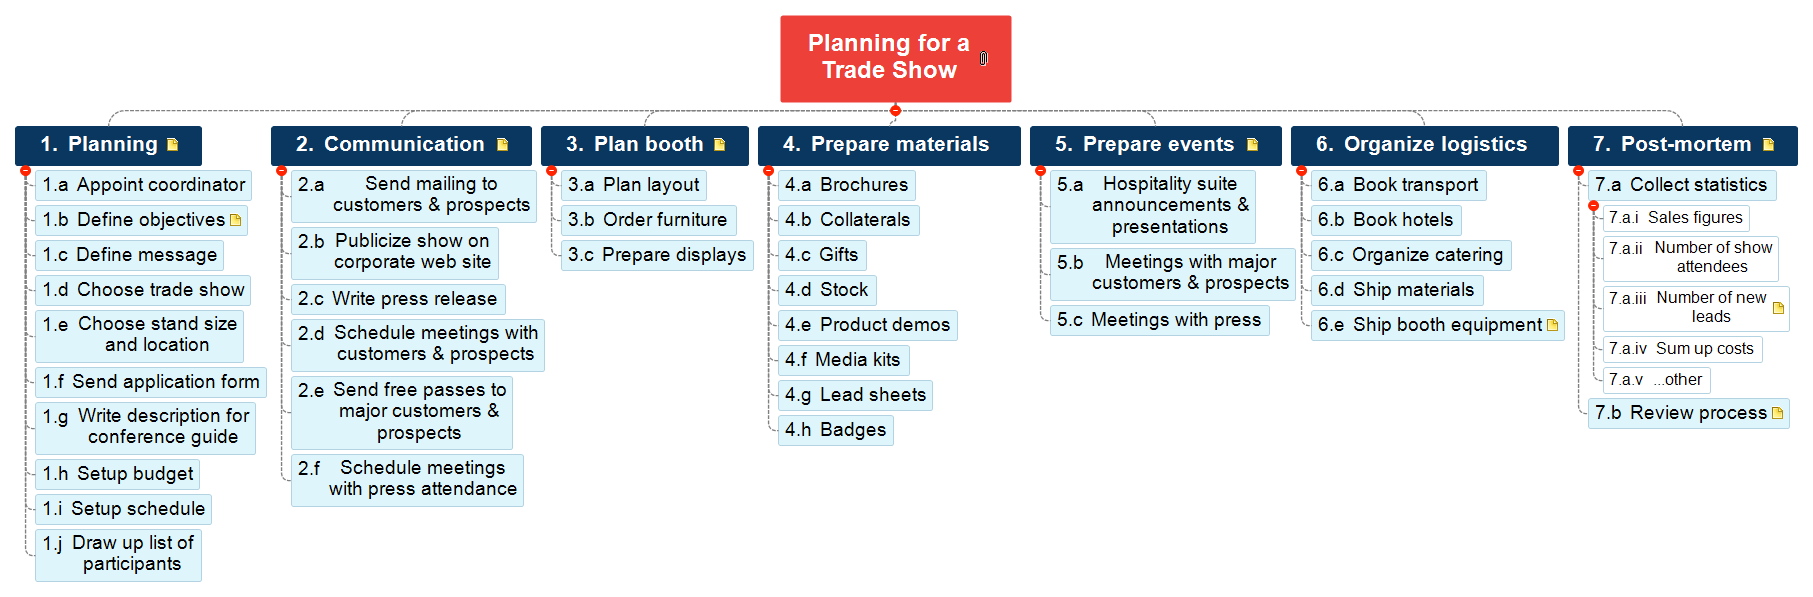 planning a tradeshow, wbs example, work breakdown structure